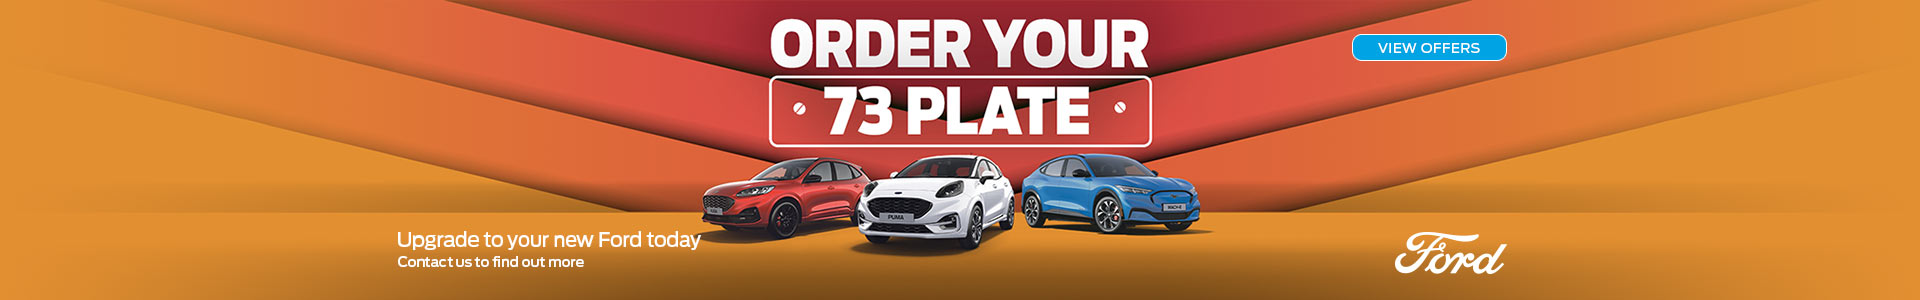 New Ford Cars - 73 plates - Order yours today